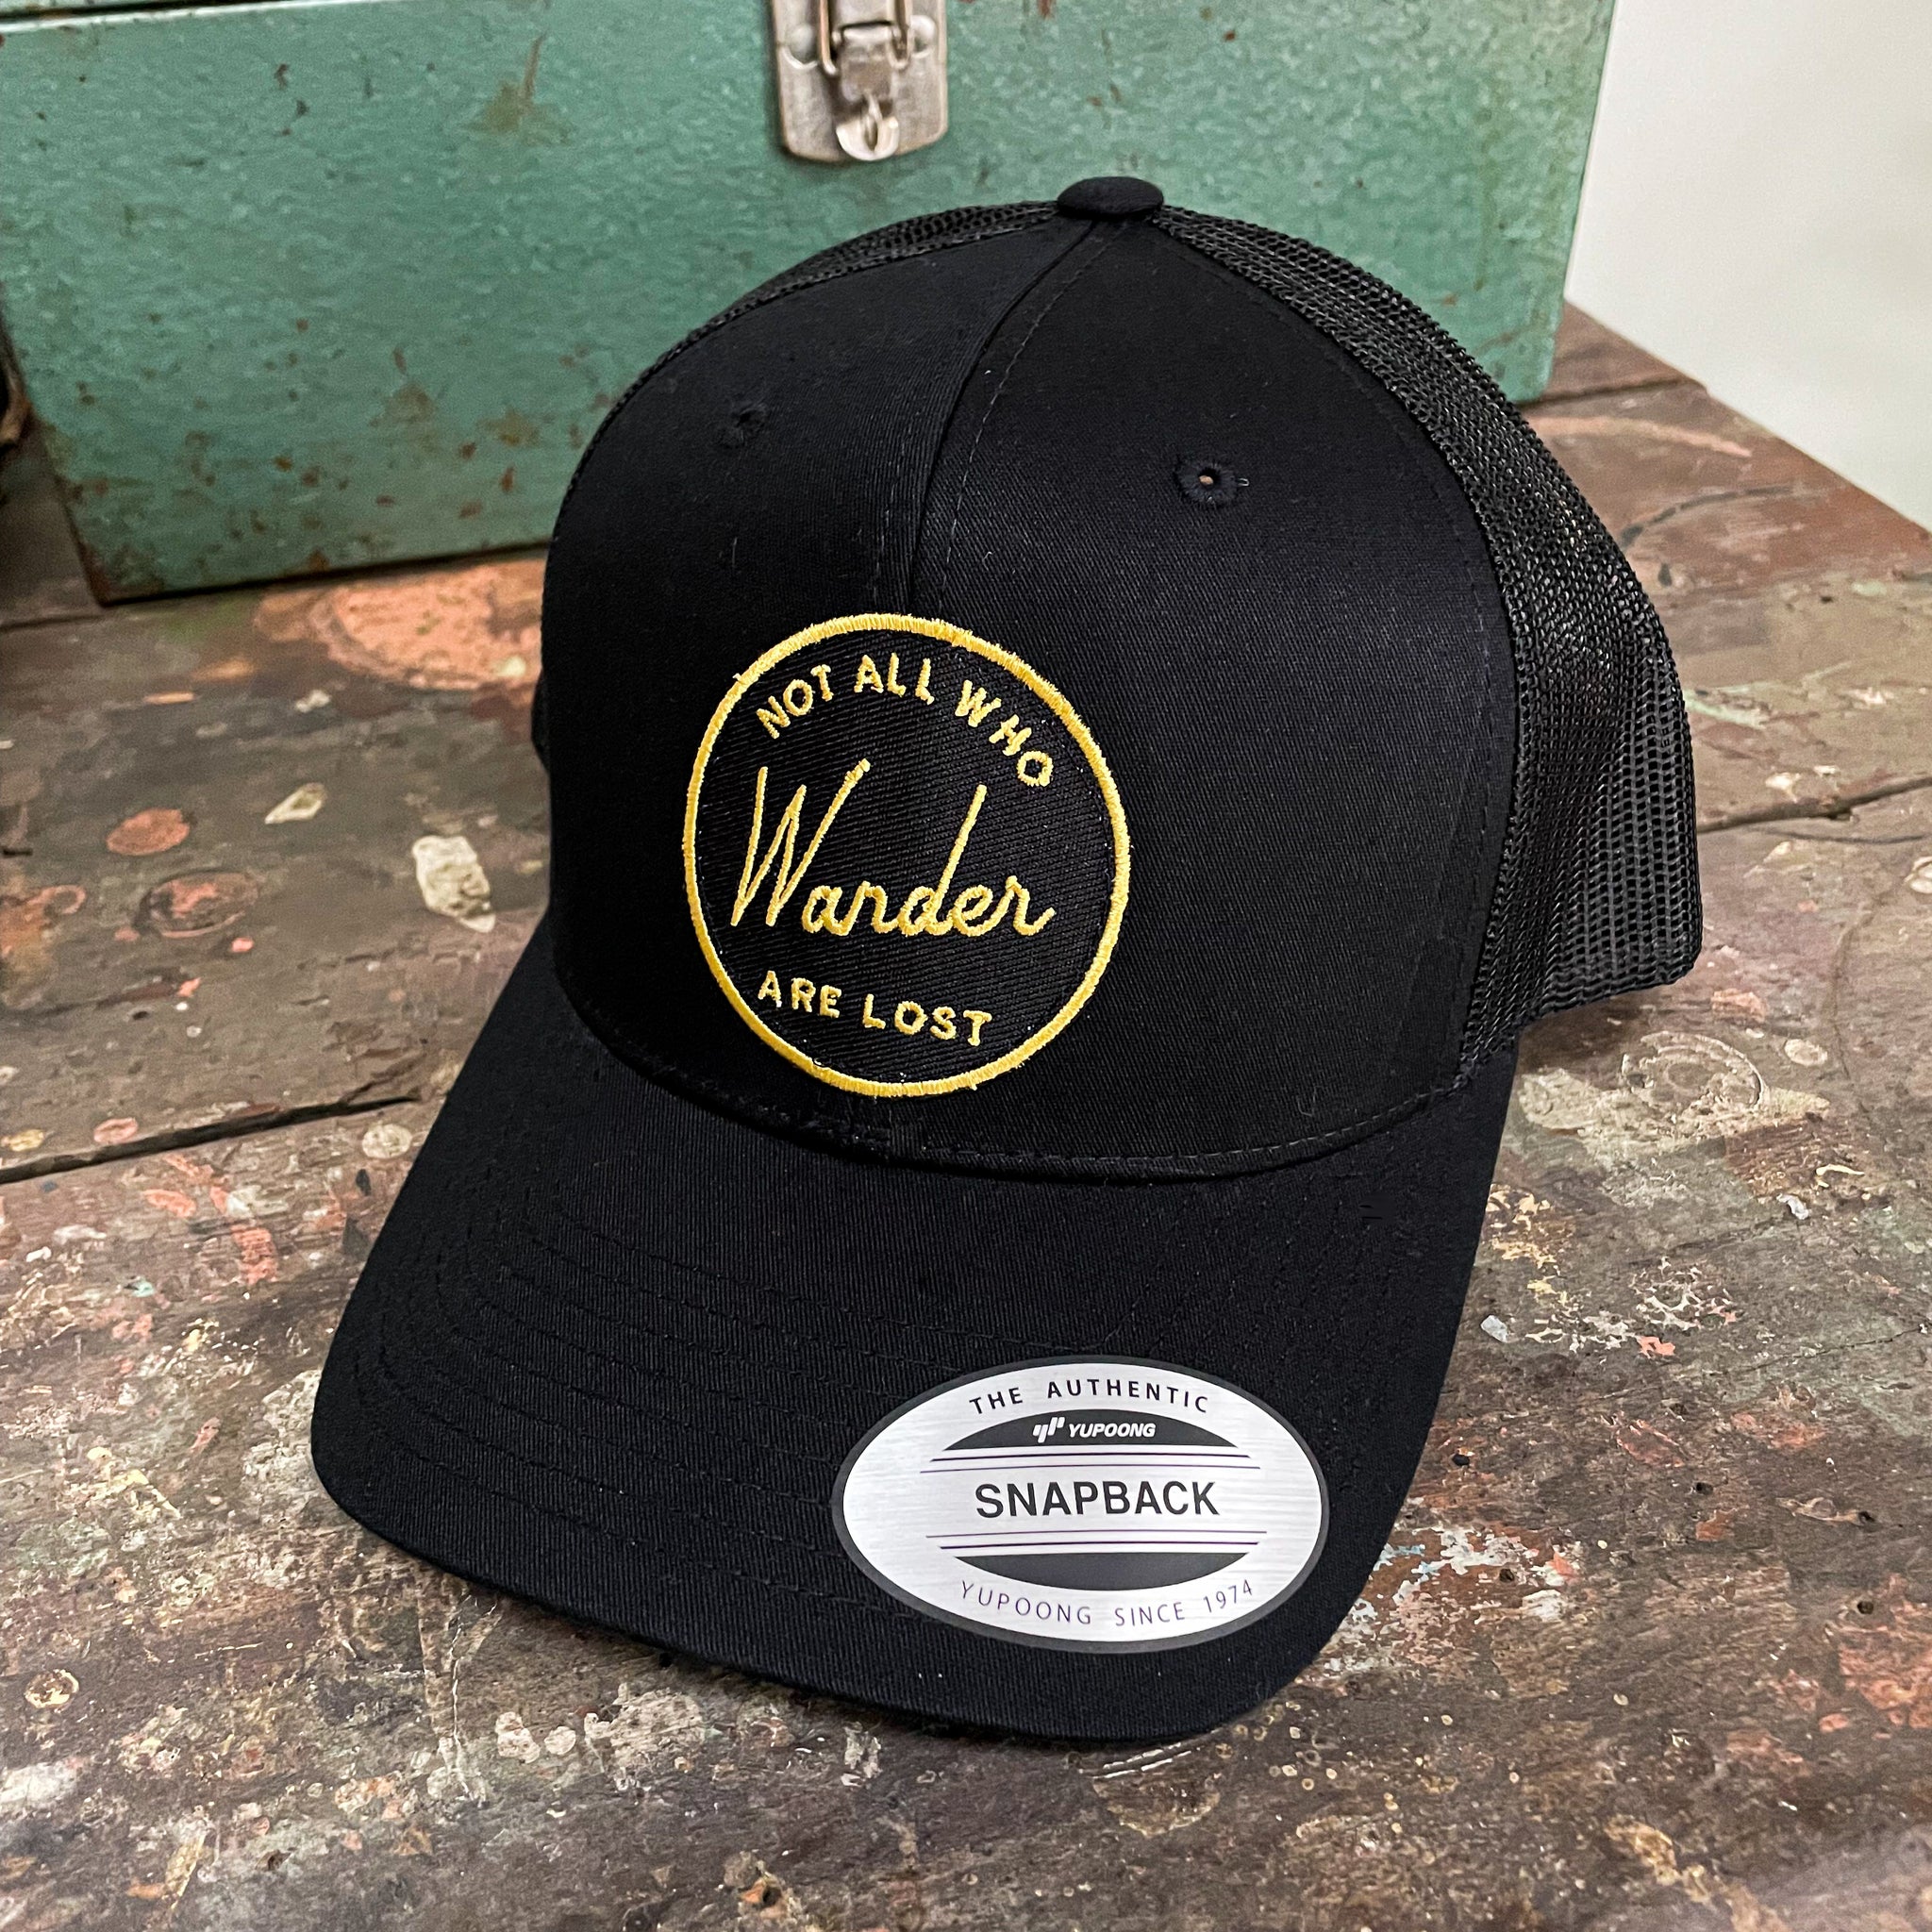 Not All Those Who Wander Are Lost Trucker Hat